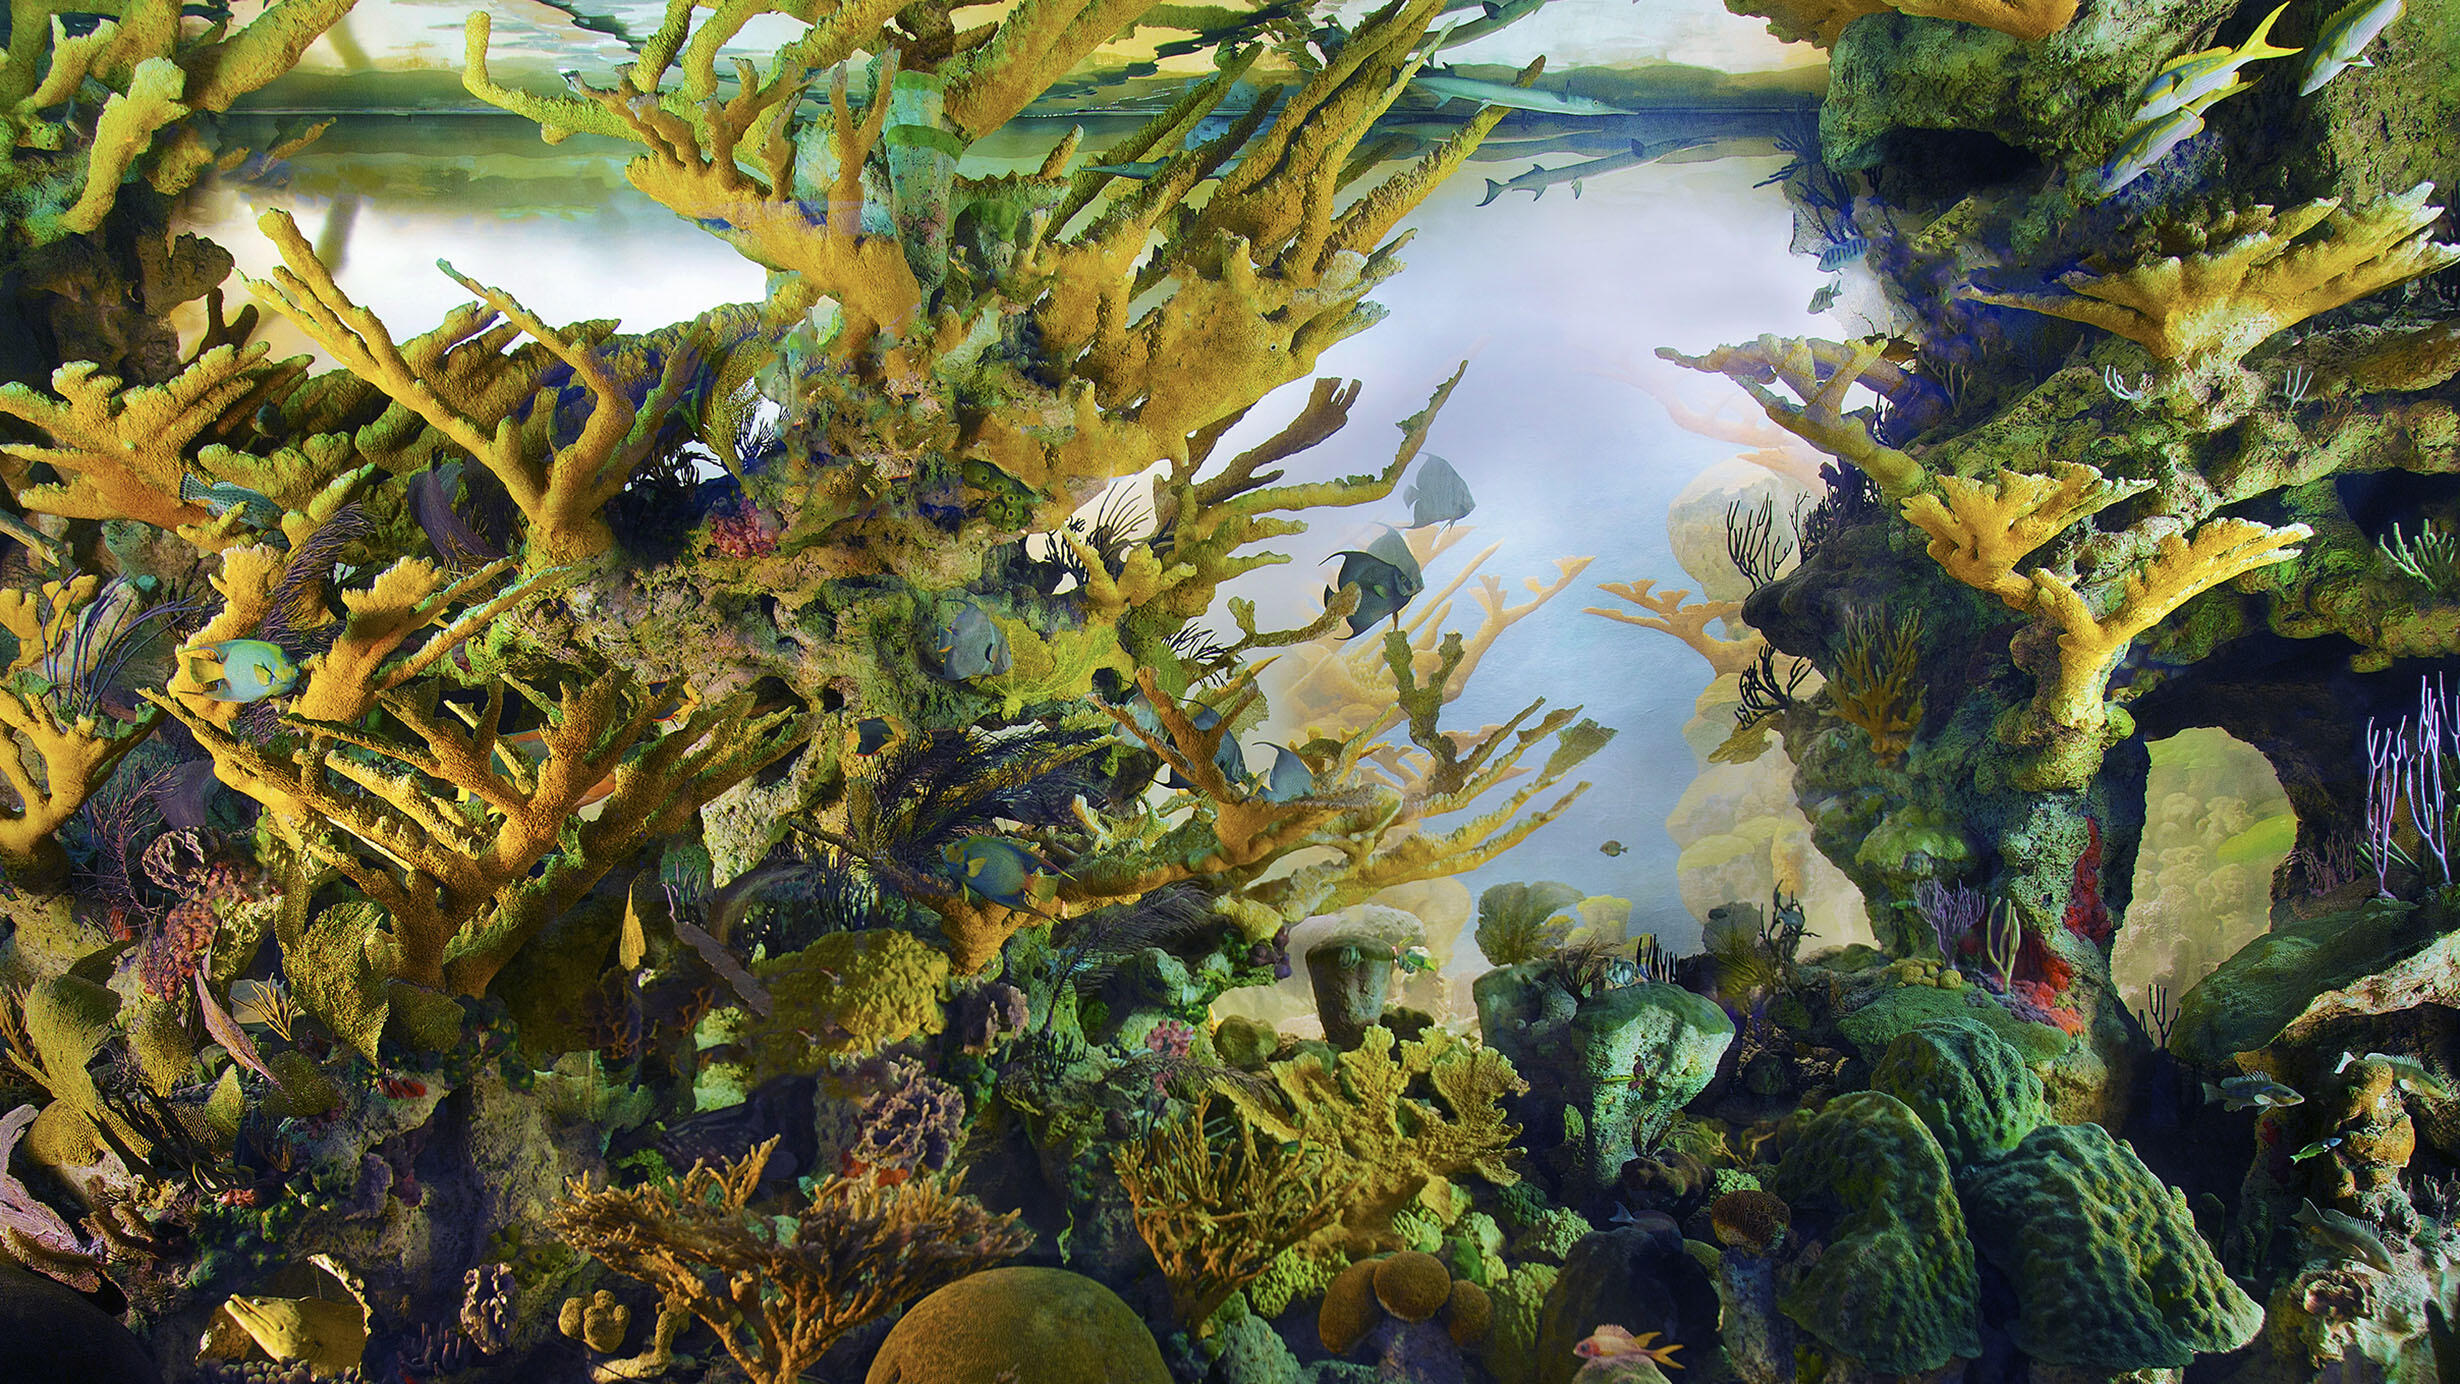 Detail view of the Andros Coral Reef Diorama shows the meticulously painted corals.